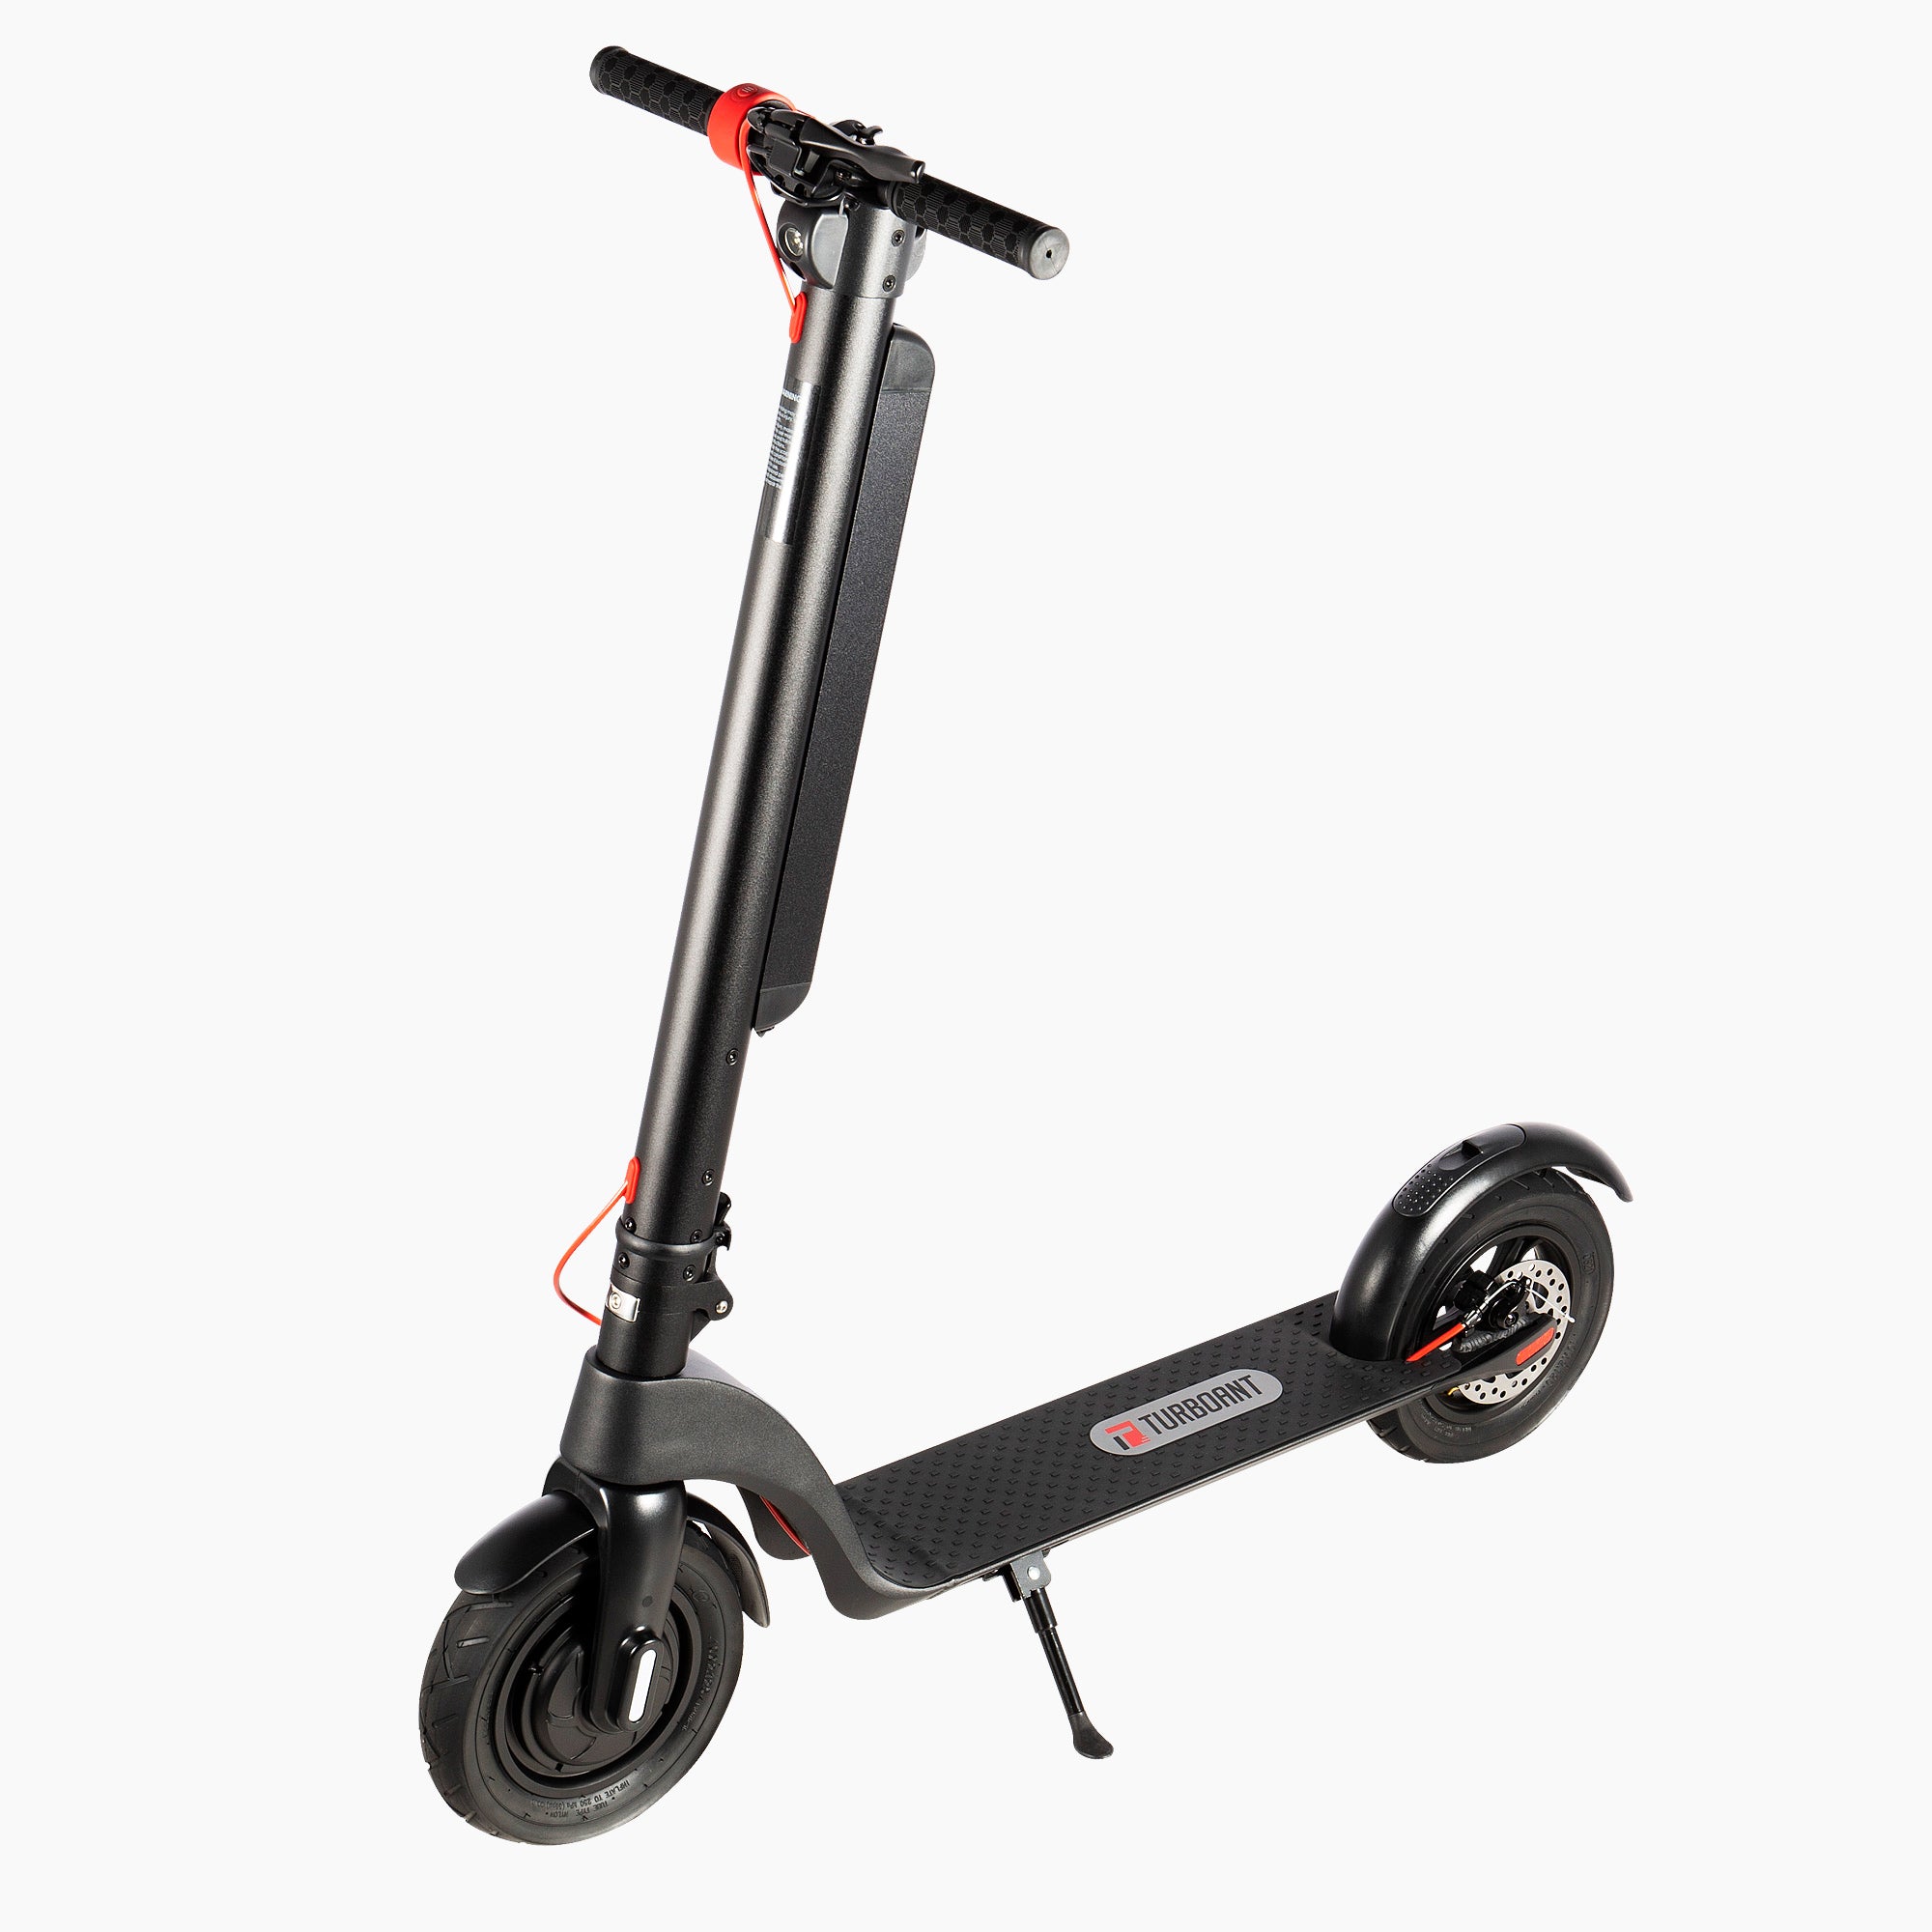 Poignee cable frein scooter trotinette electrique trotinette